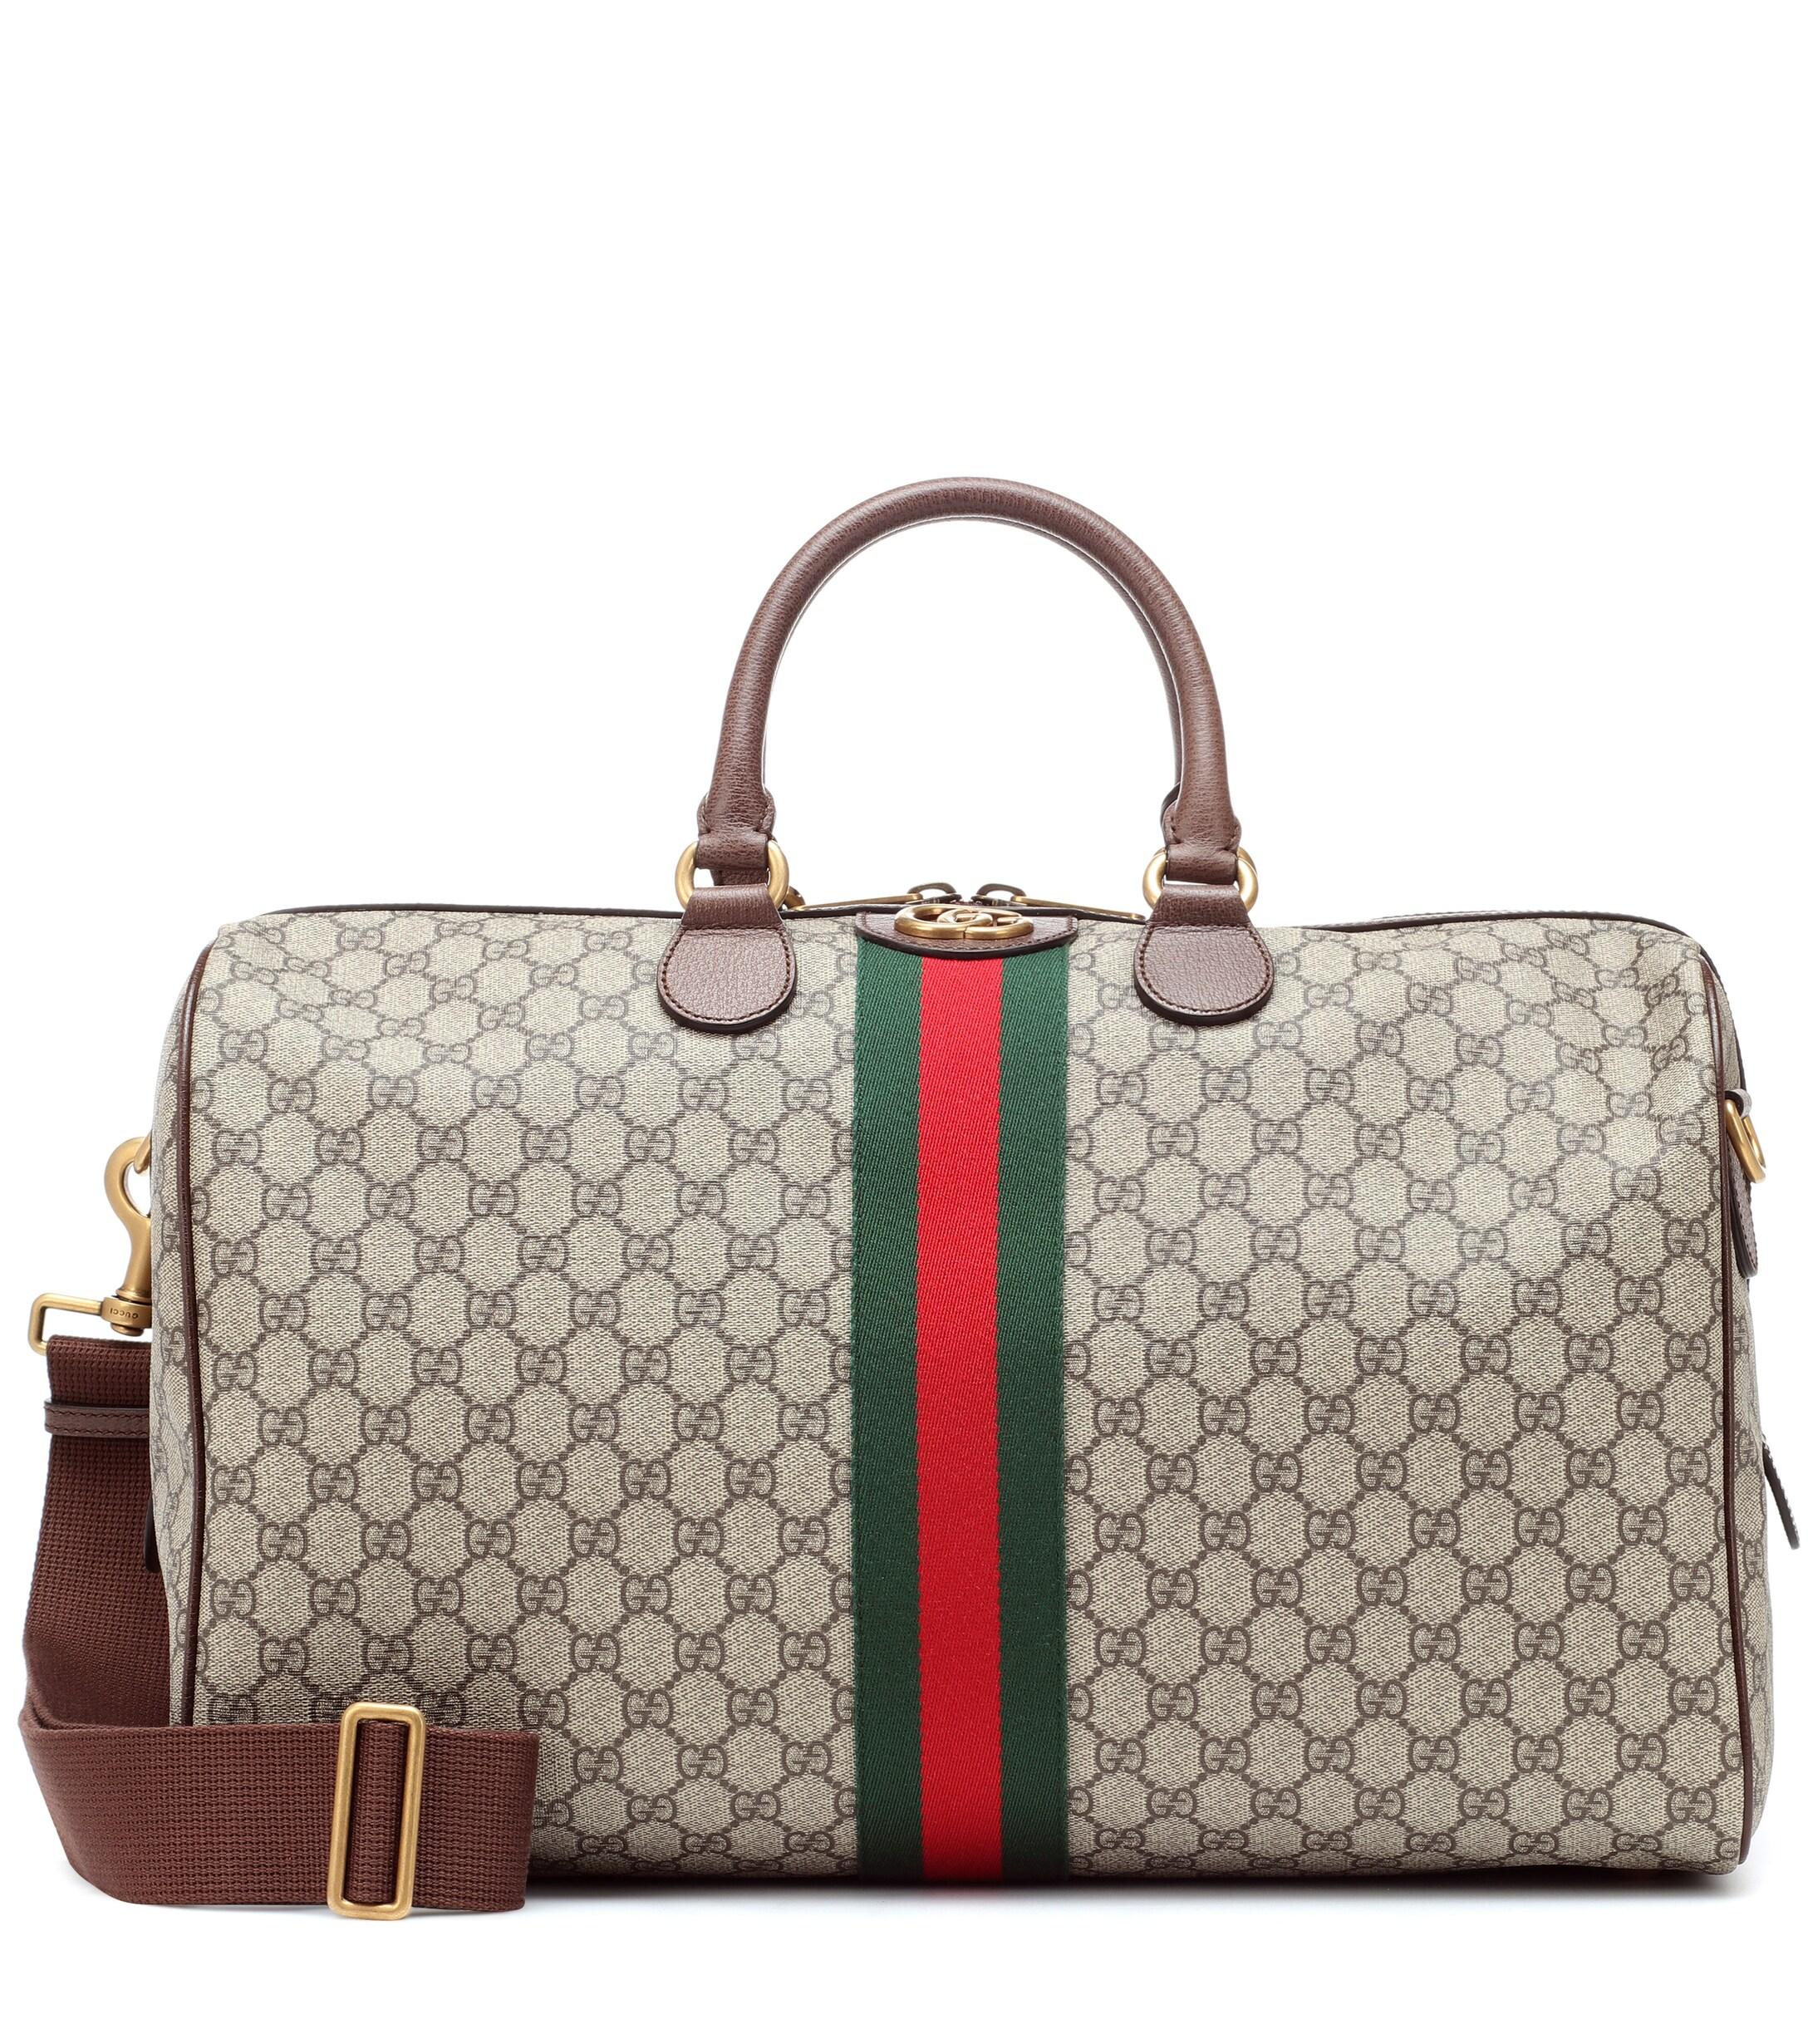 Gucci Ophidia GG Travel Bag in Beige (Natural) - Lyst